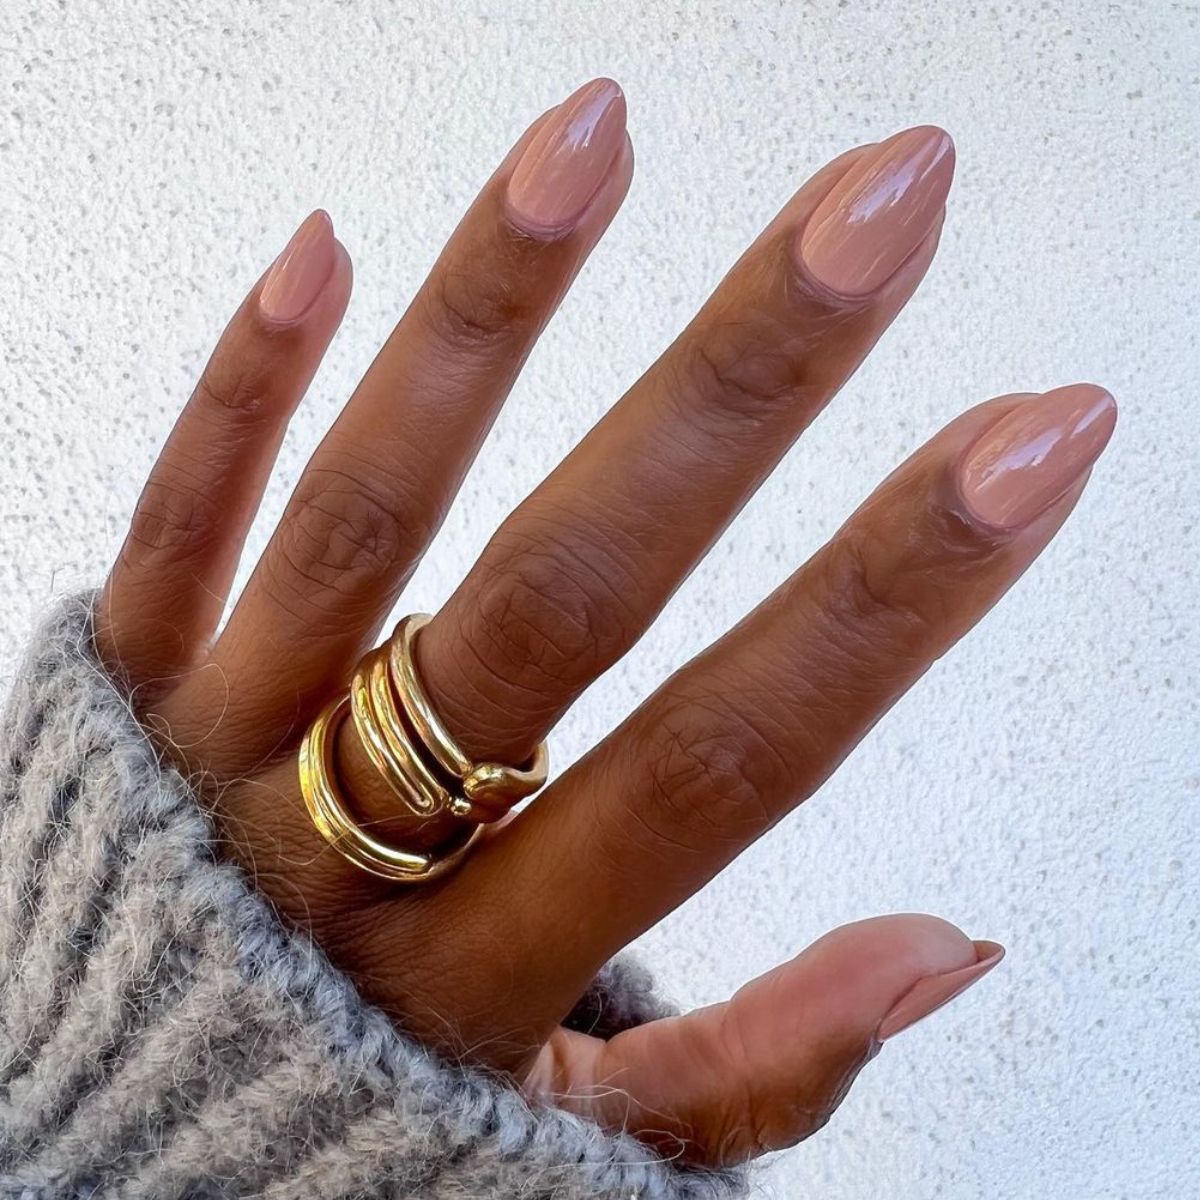 10 Natural Looking Nail Designs for Minimalists – Maniology